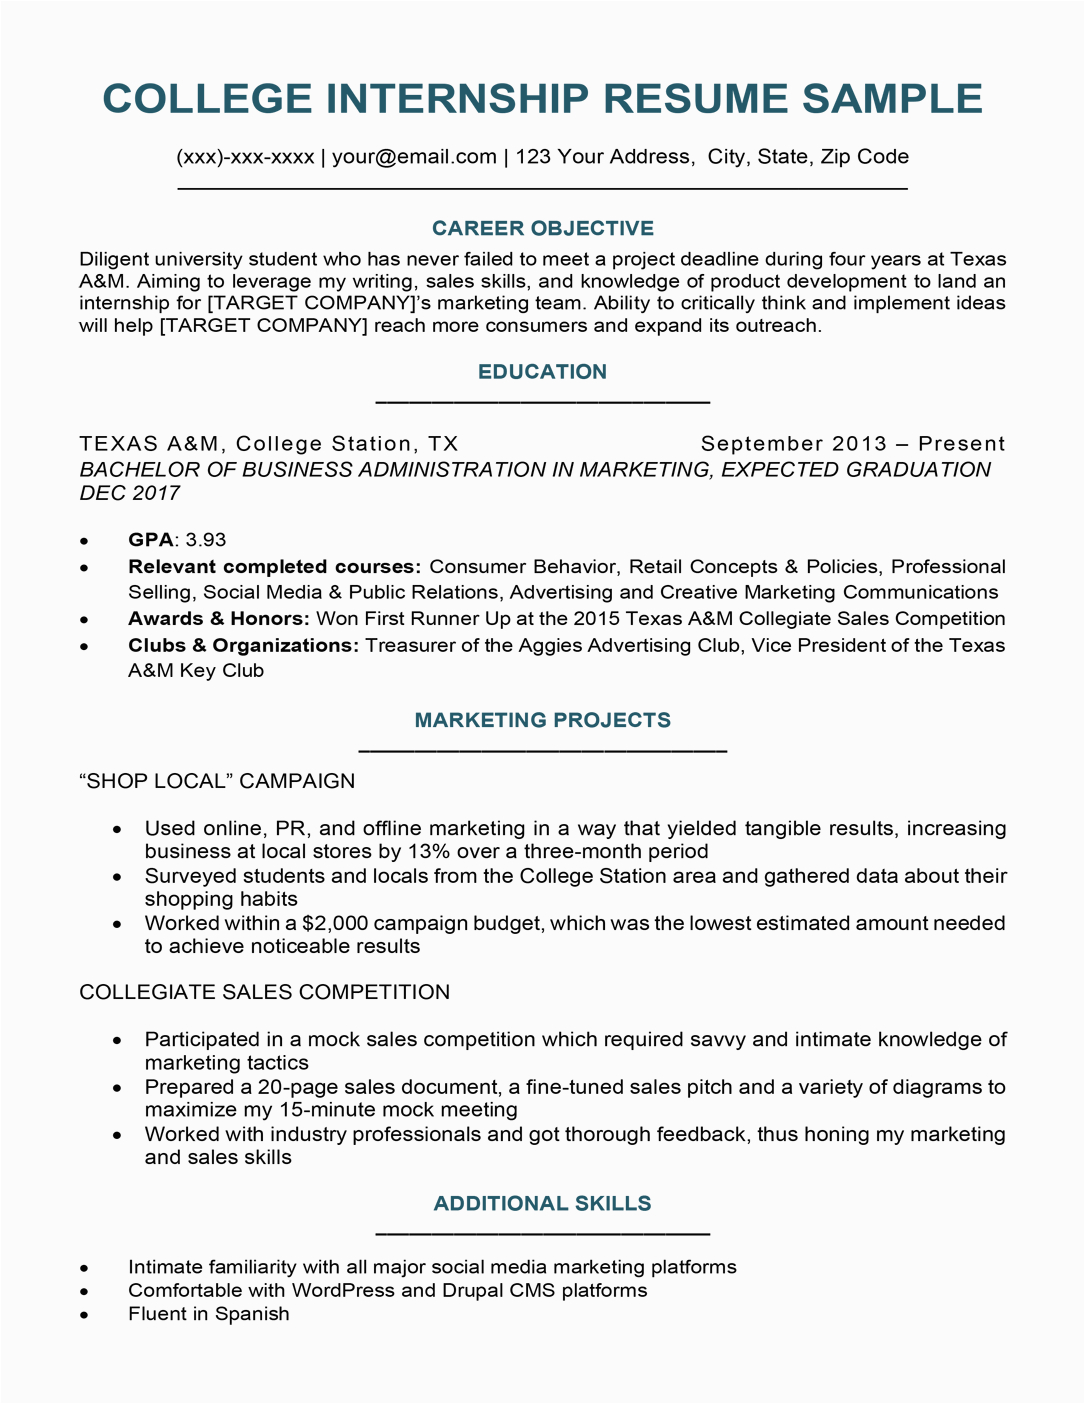 Resume Right Out Of College Samples College Student Resume Sample & Writing Tips